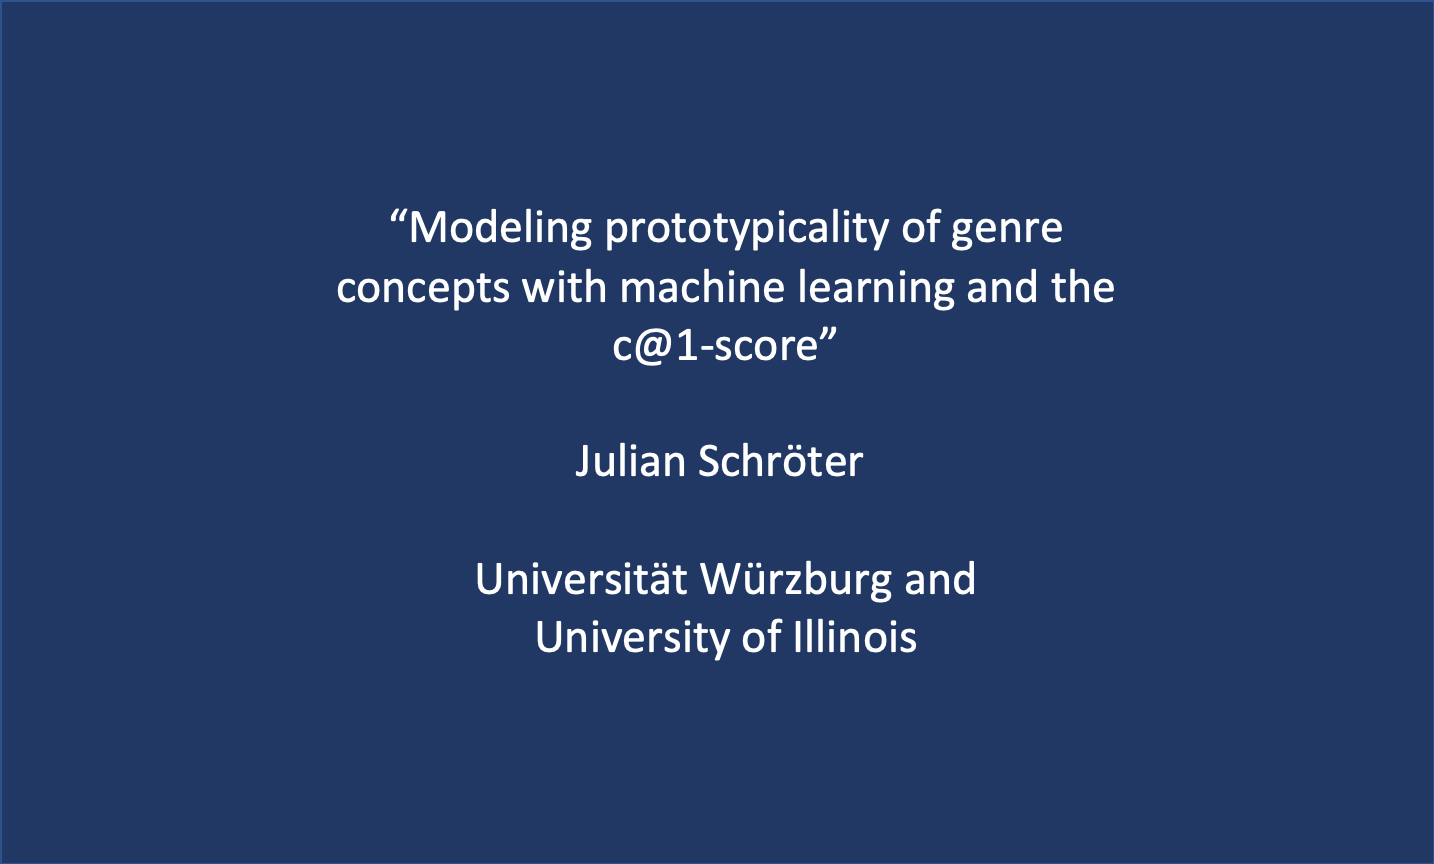 Workshop 5: Julian Schröter, ‘Modeling prototypicality of genre concepts with machine learning and the c@1-score’